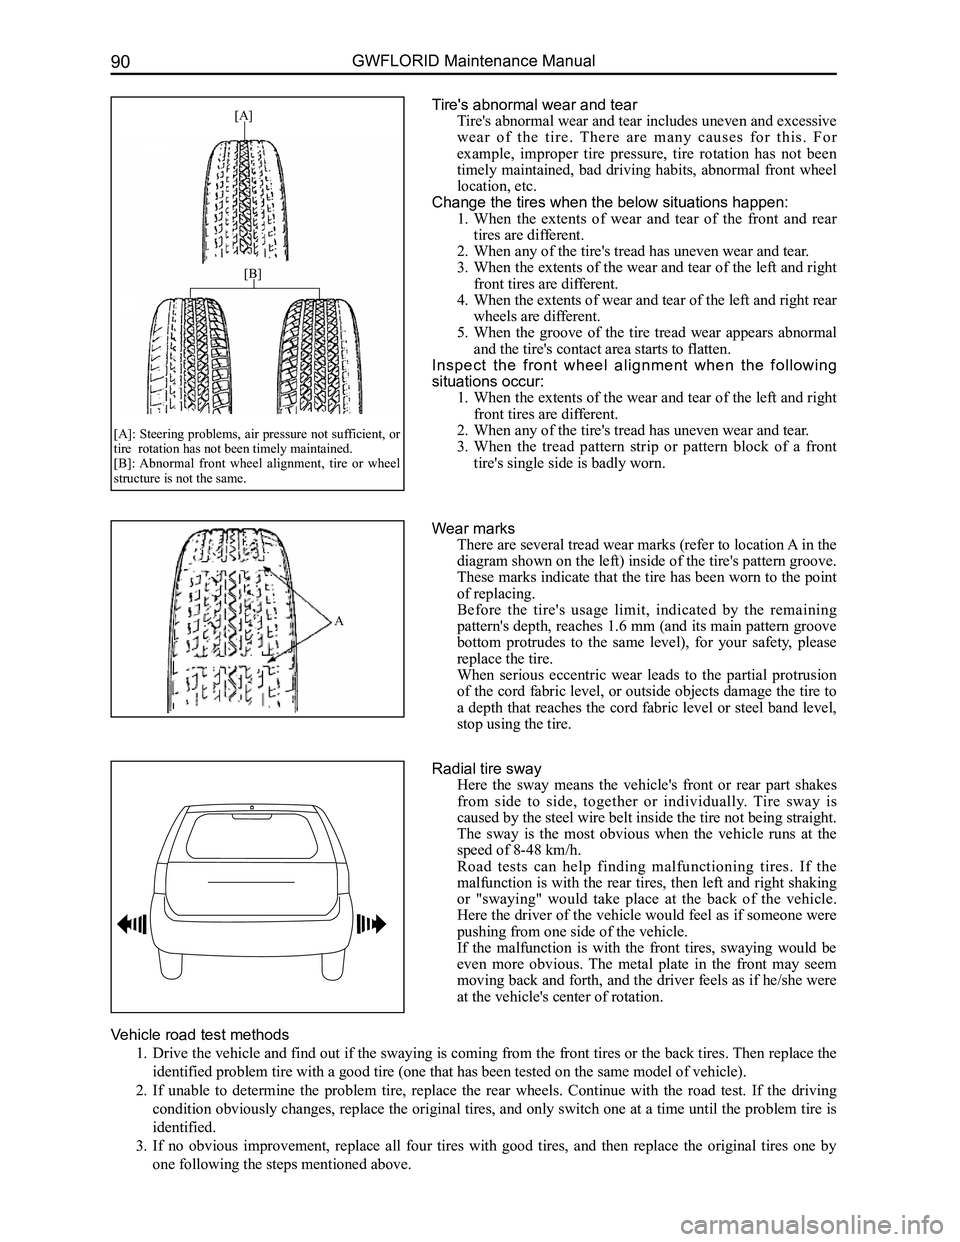 GREAT WALL FLORID 2008  Service Manual Downloaded from www.Manualslib.com manuals search engine GWFLORID Maintenance Manual90
Vehicle road test methods
1. Drive the vehicle and find out if the swaying is coming from the front tires or the 